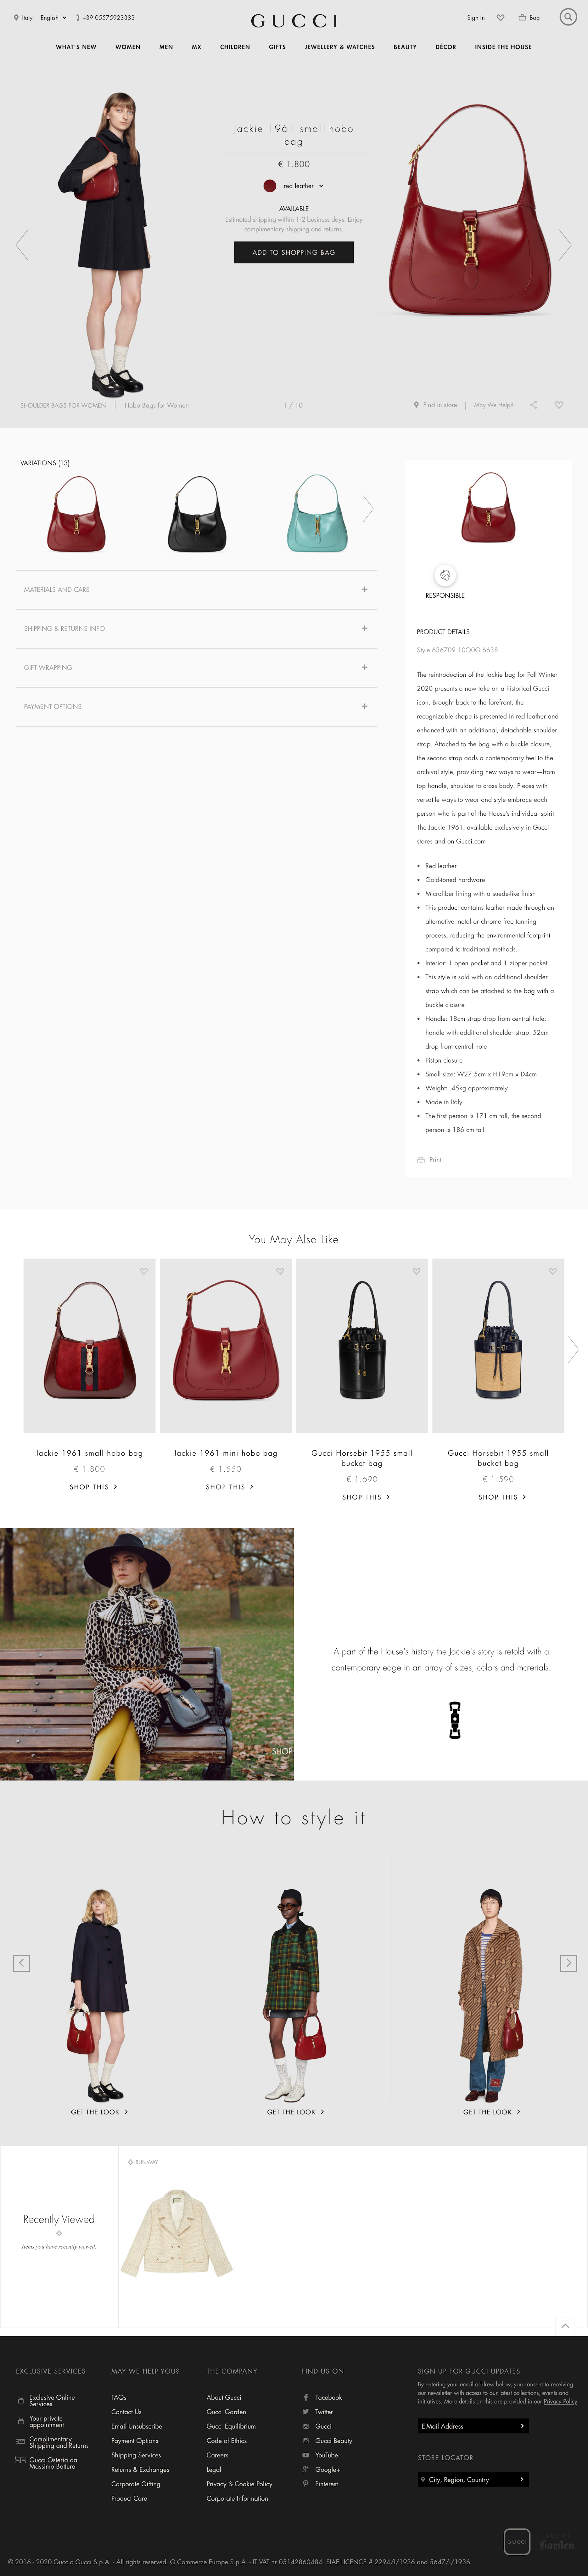 Gucci's Product Page – 524 of 1077 Product Page Examples – Baymard Institute